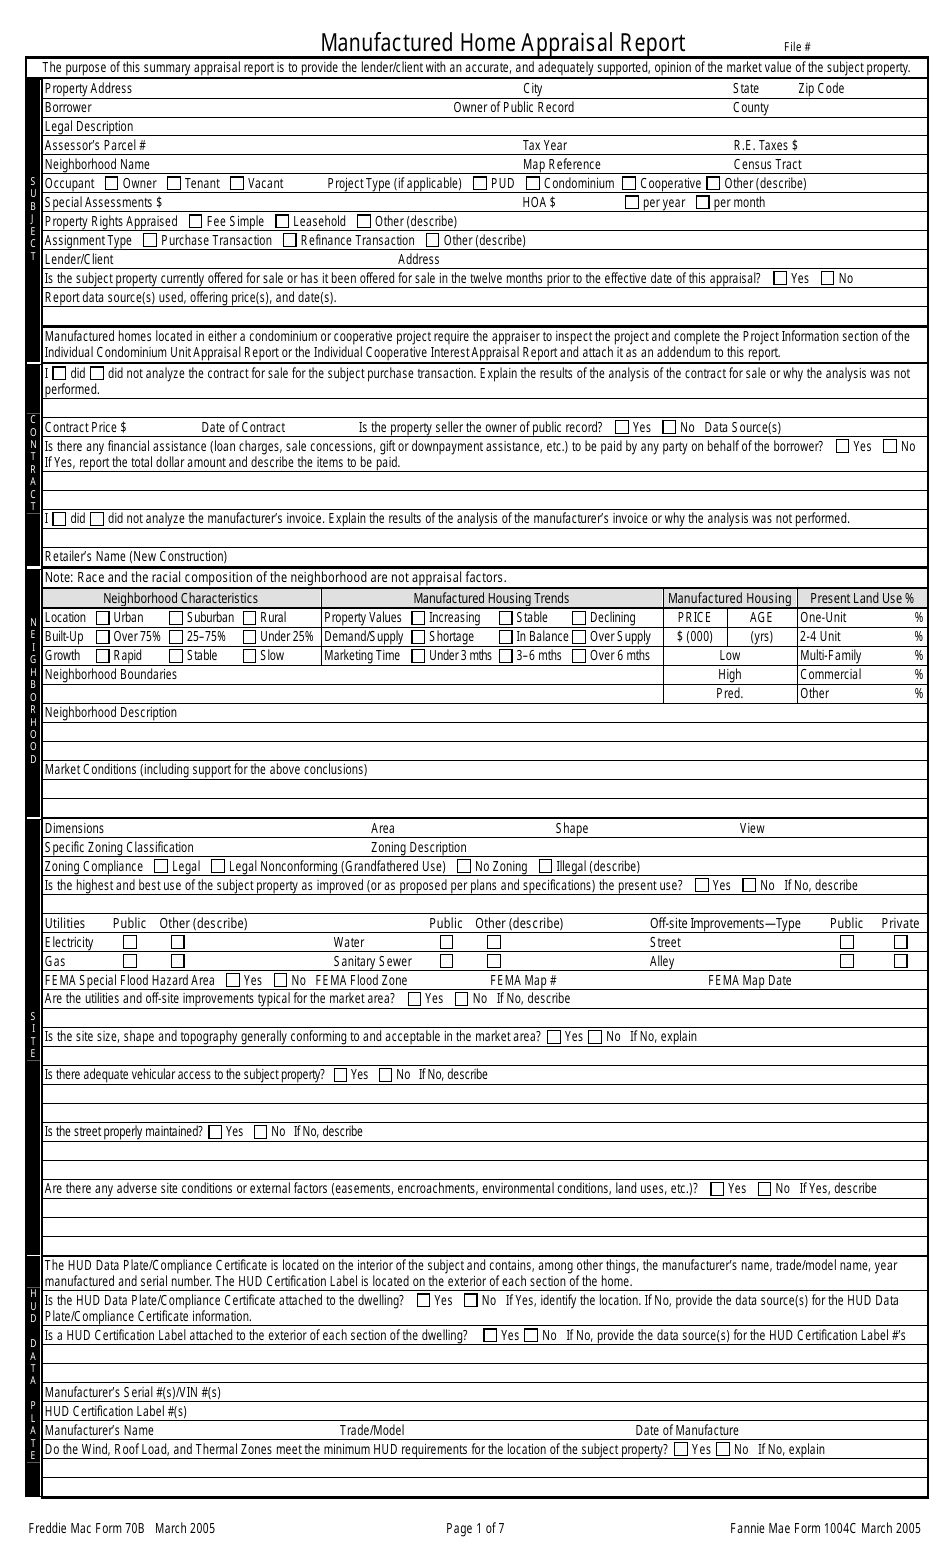 Fannie Mae Form 1004C Manufactured Home Appraisal Report, Page 1